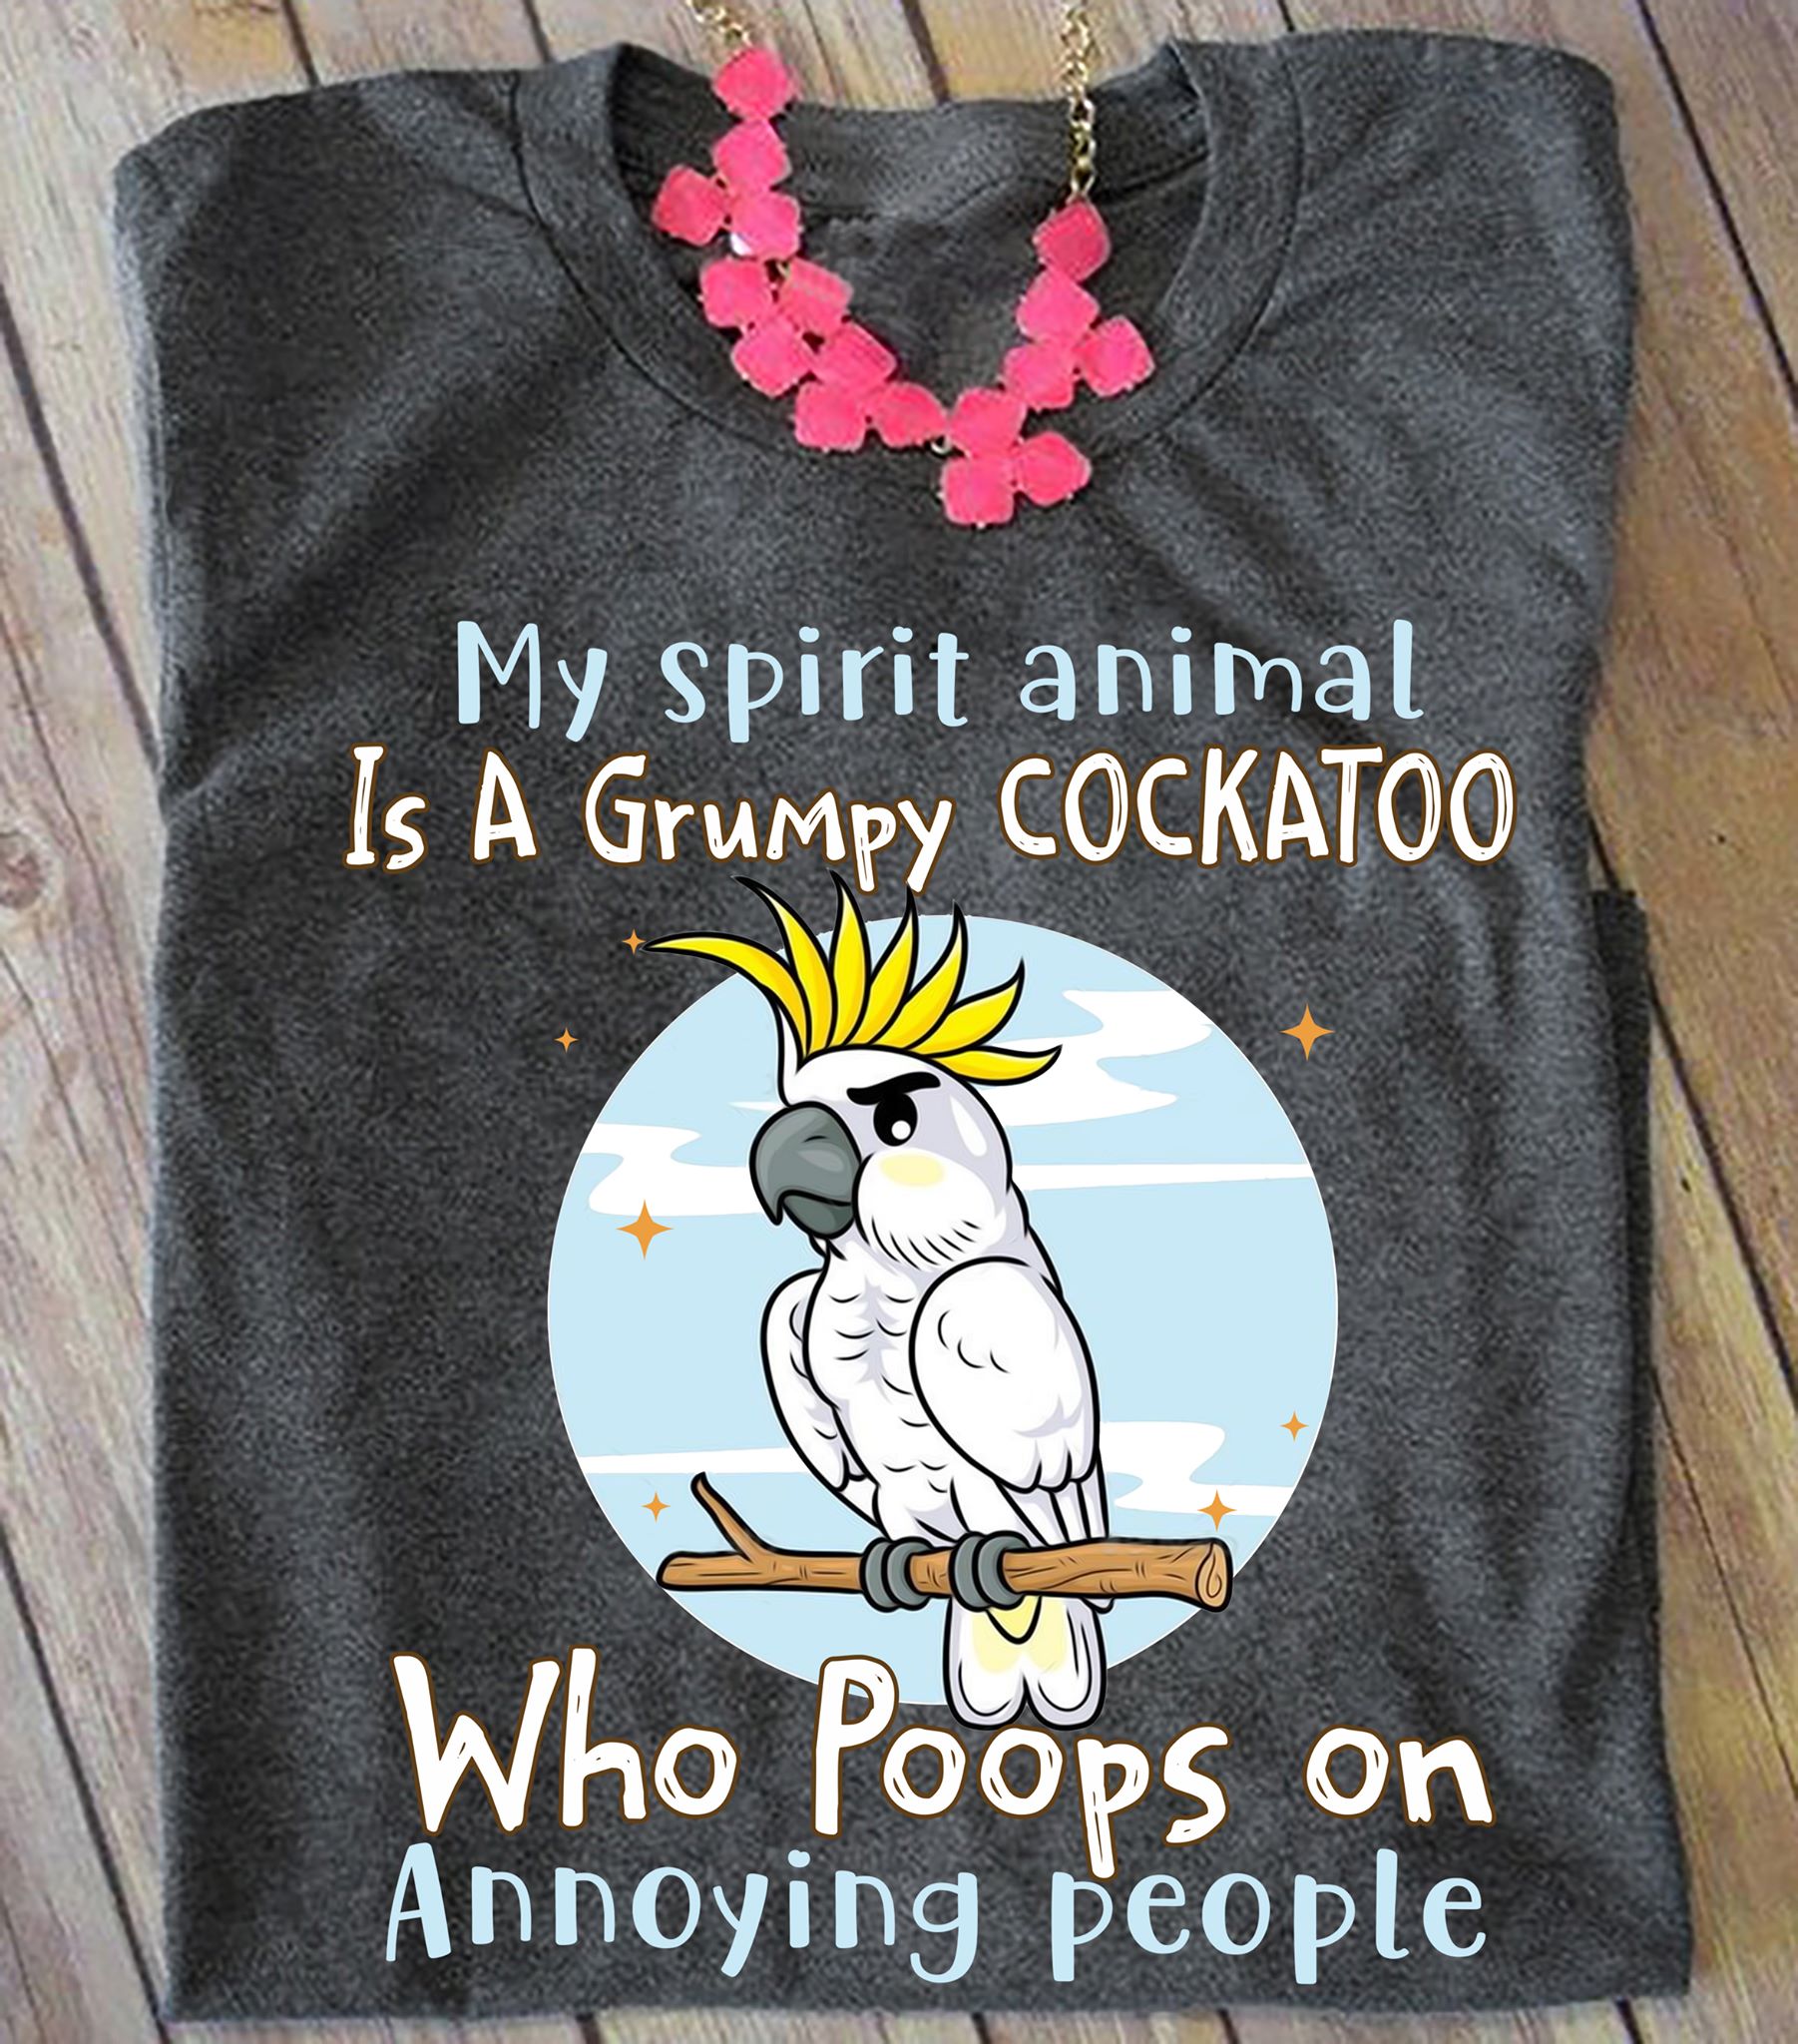 My spirit animal is a grumpy cockatoo who poops on annoying people